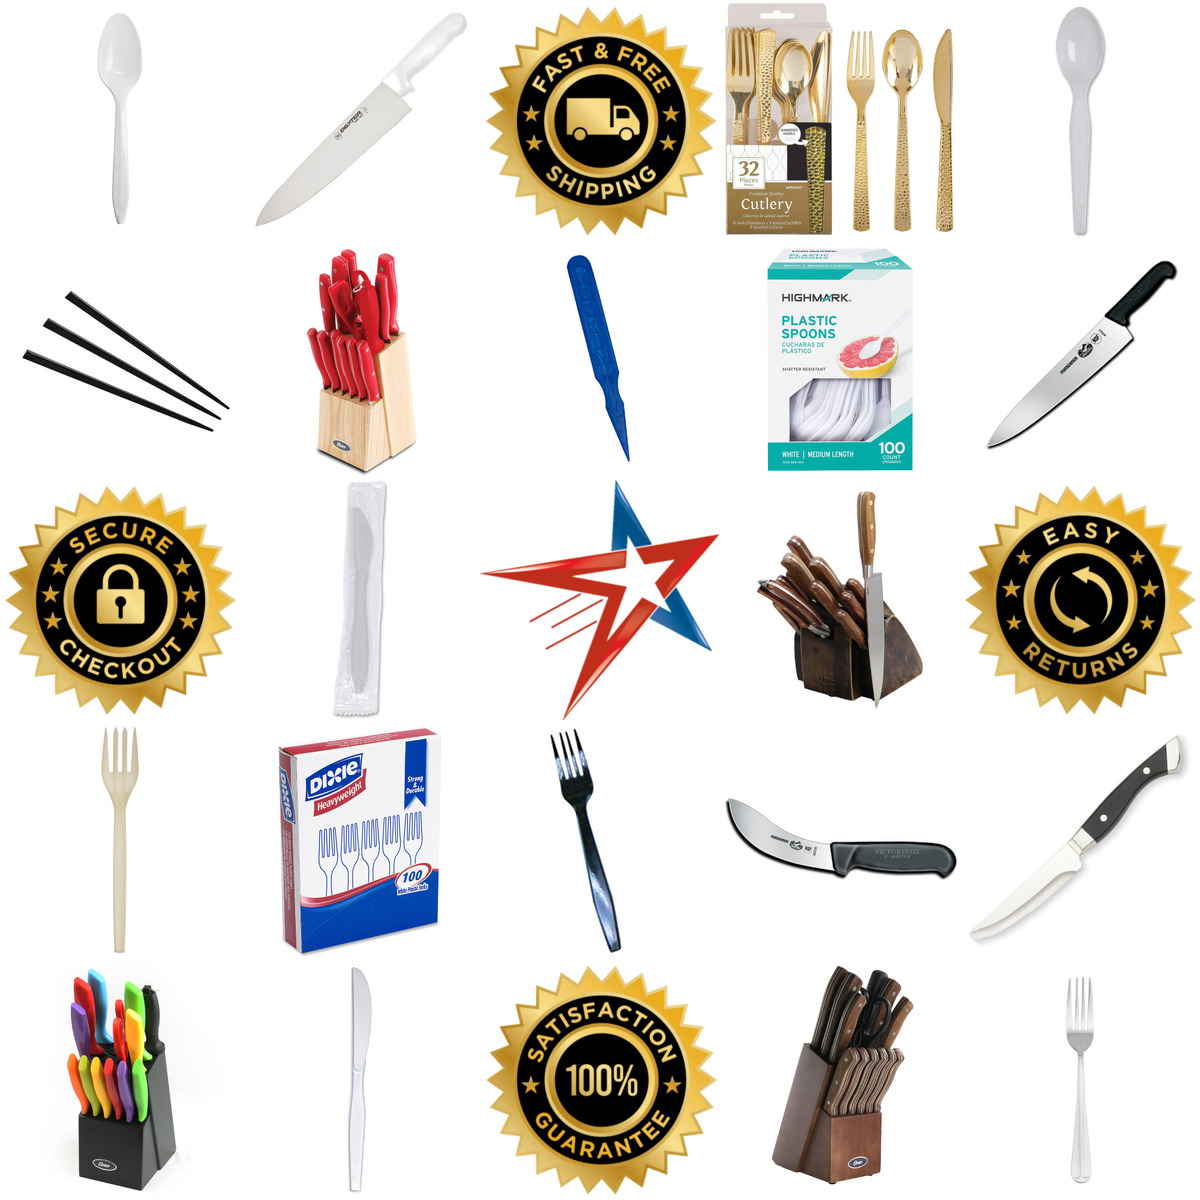 A selection of Cutlery products on GoVets